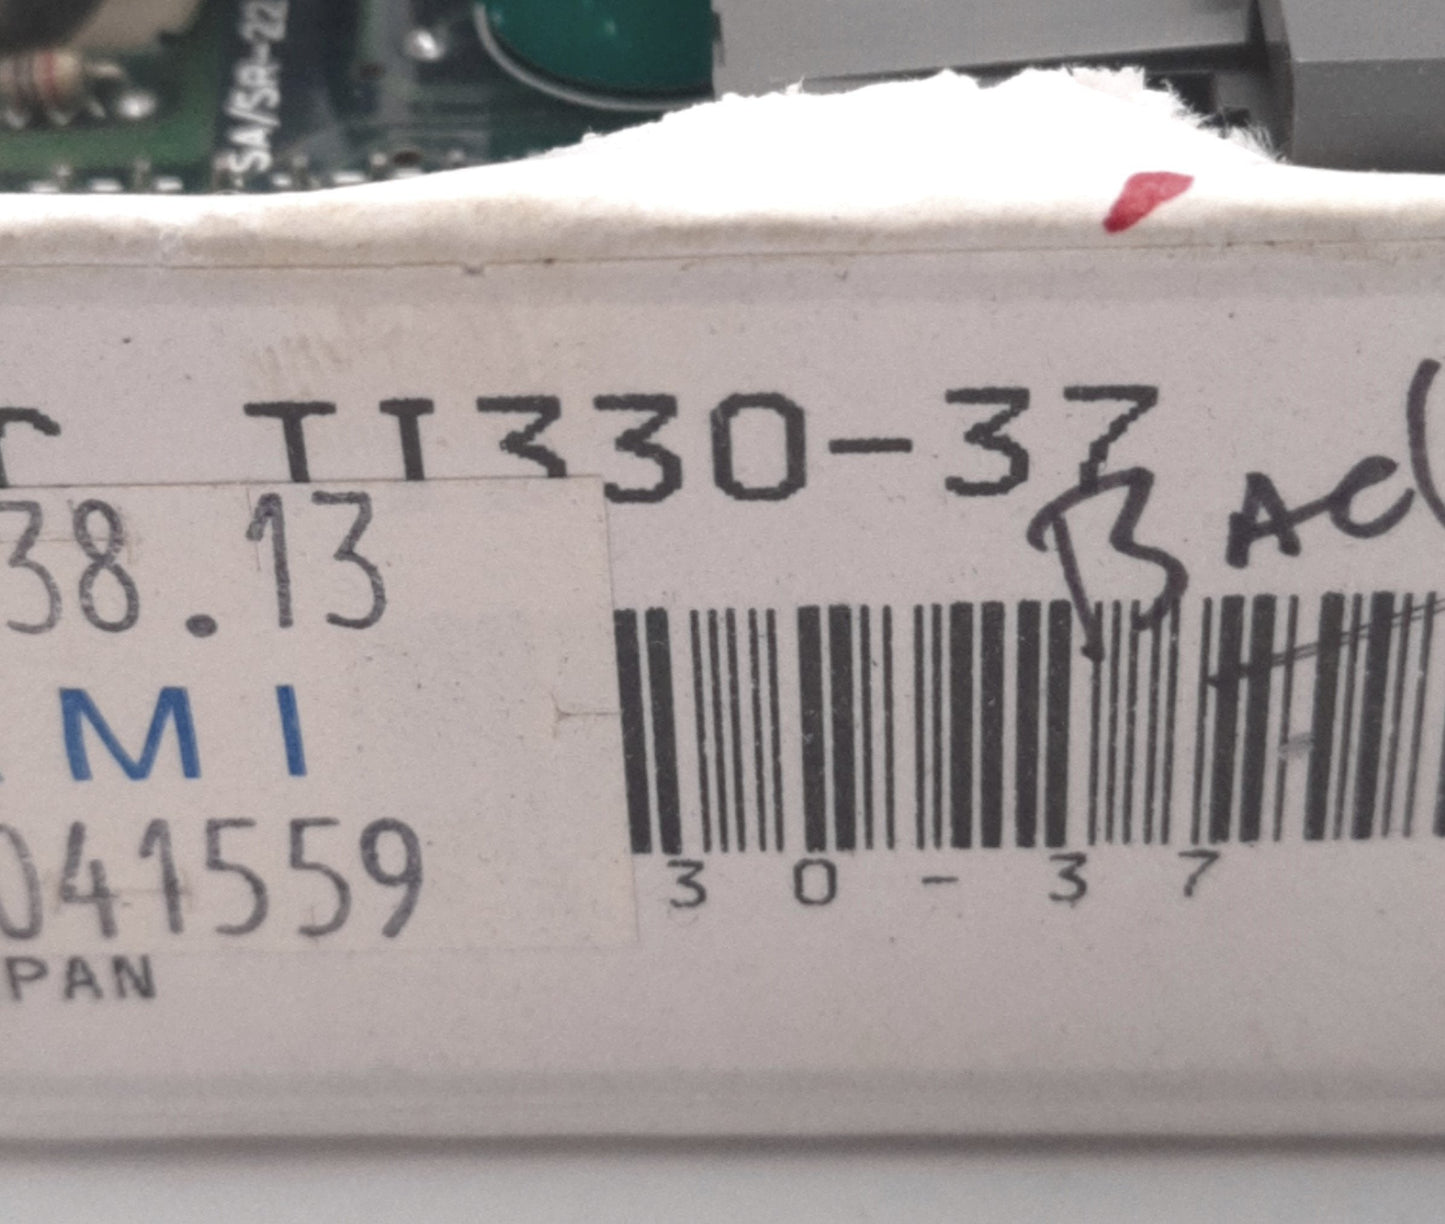 New Other Siemens TI330-37 SIMATIC PLC Central Processing CPU Module, Memory: 3.7k